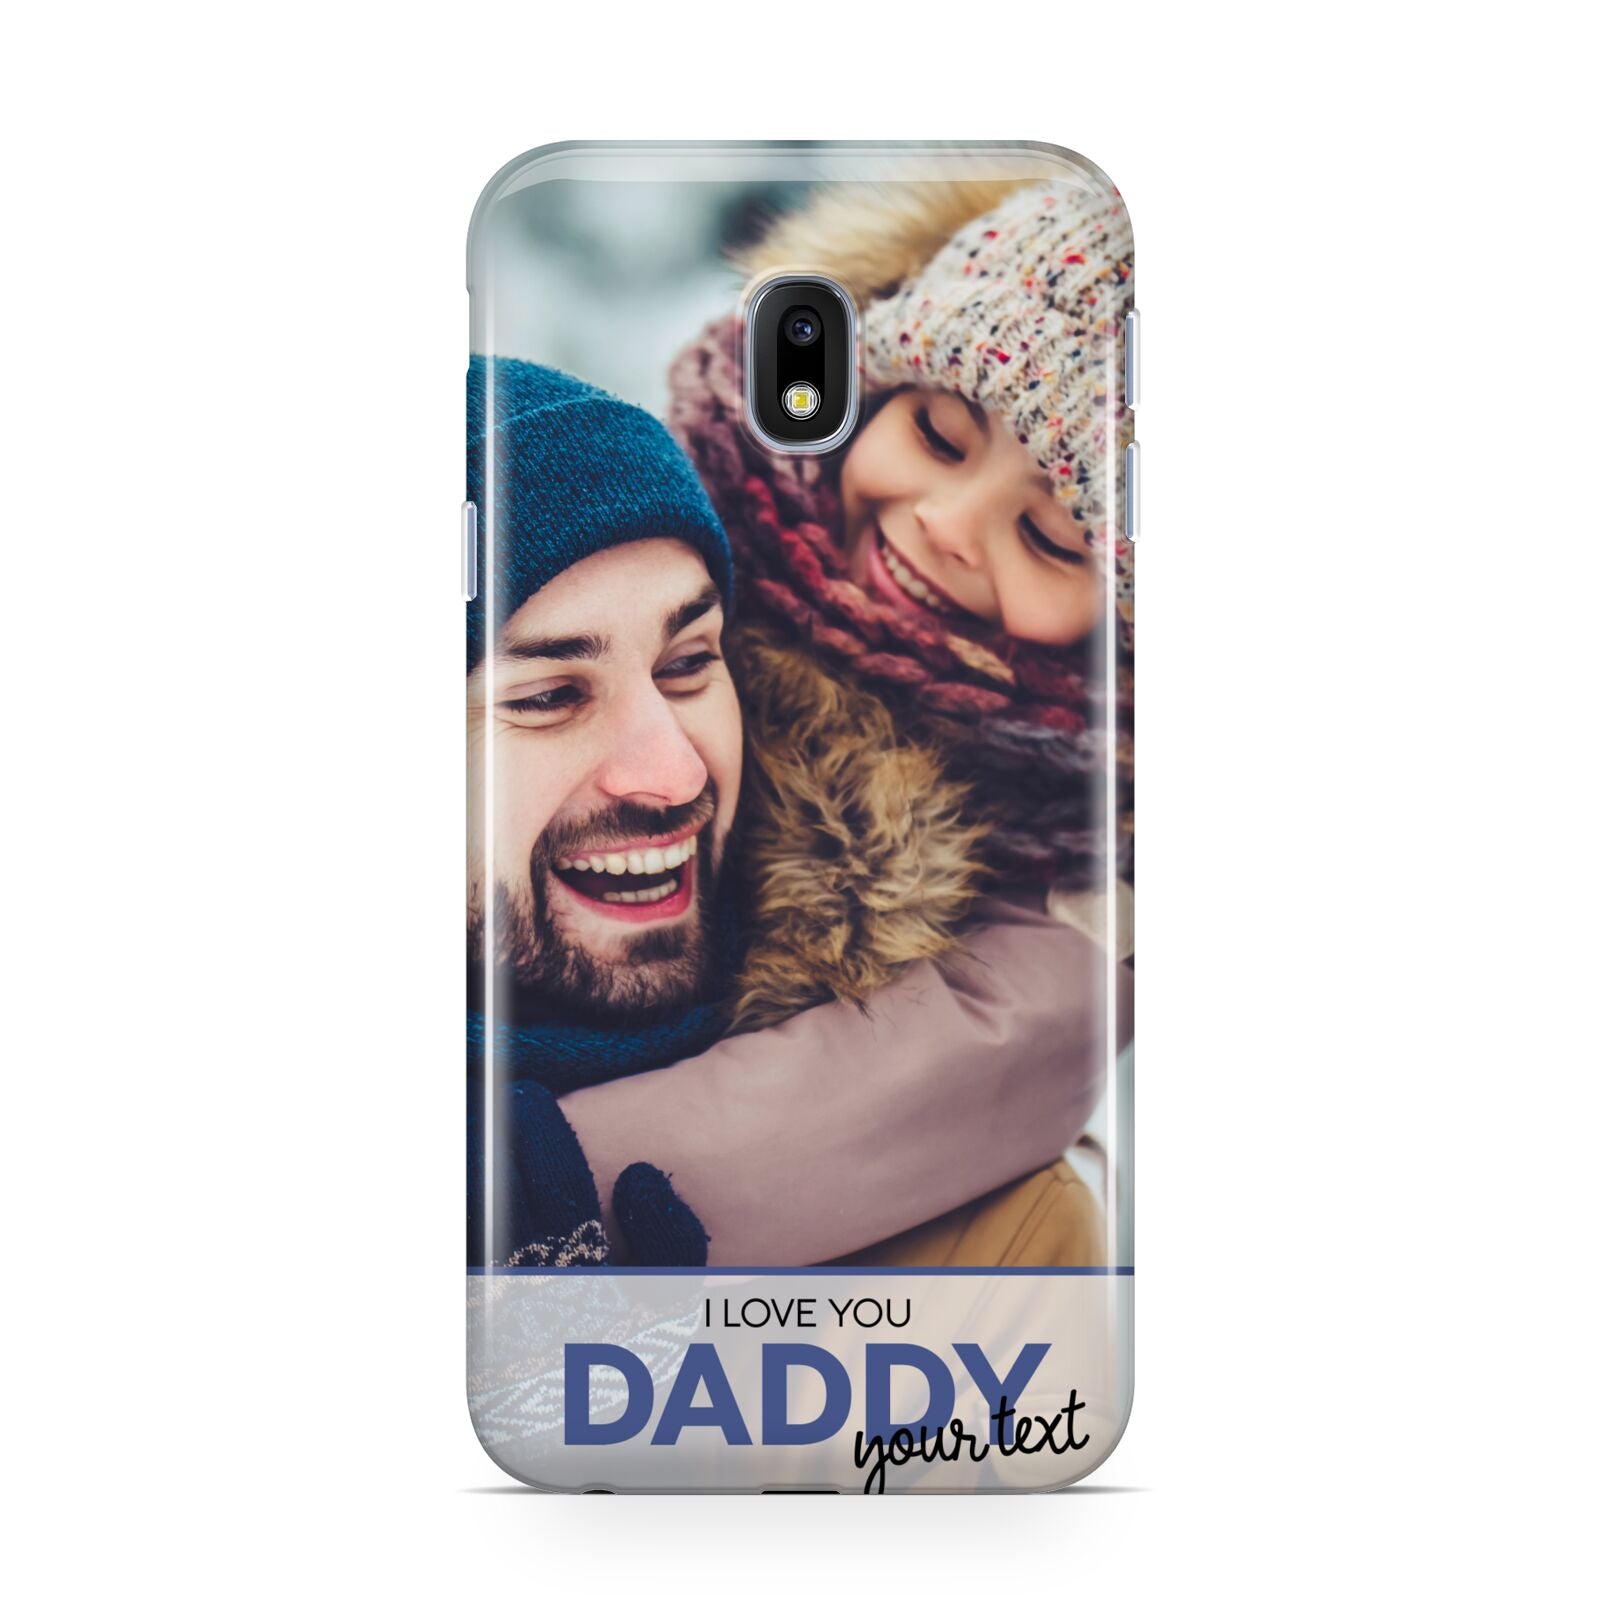 I Love You Daddy Personalised Photo Upload and Name Samsung Galaxy J3 2017 Case